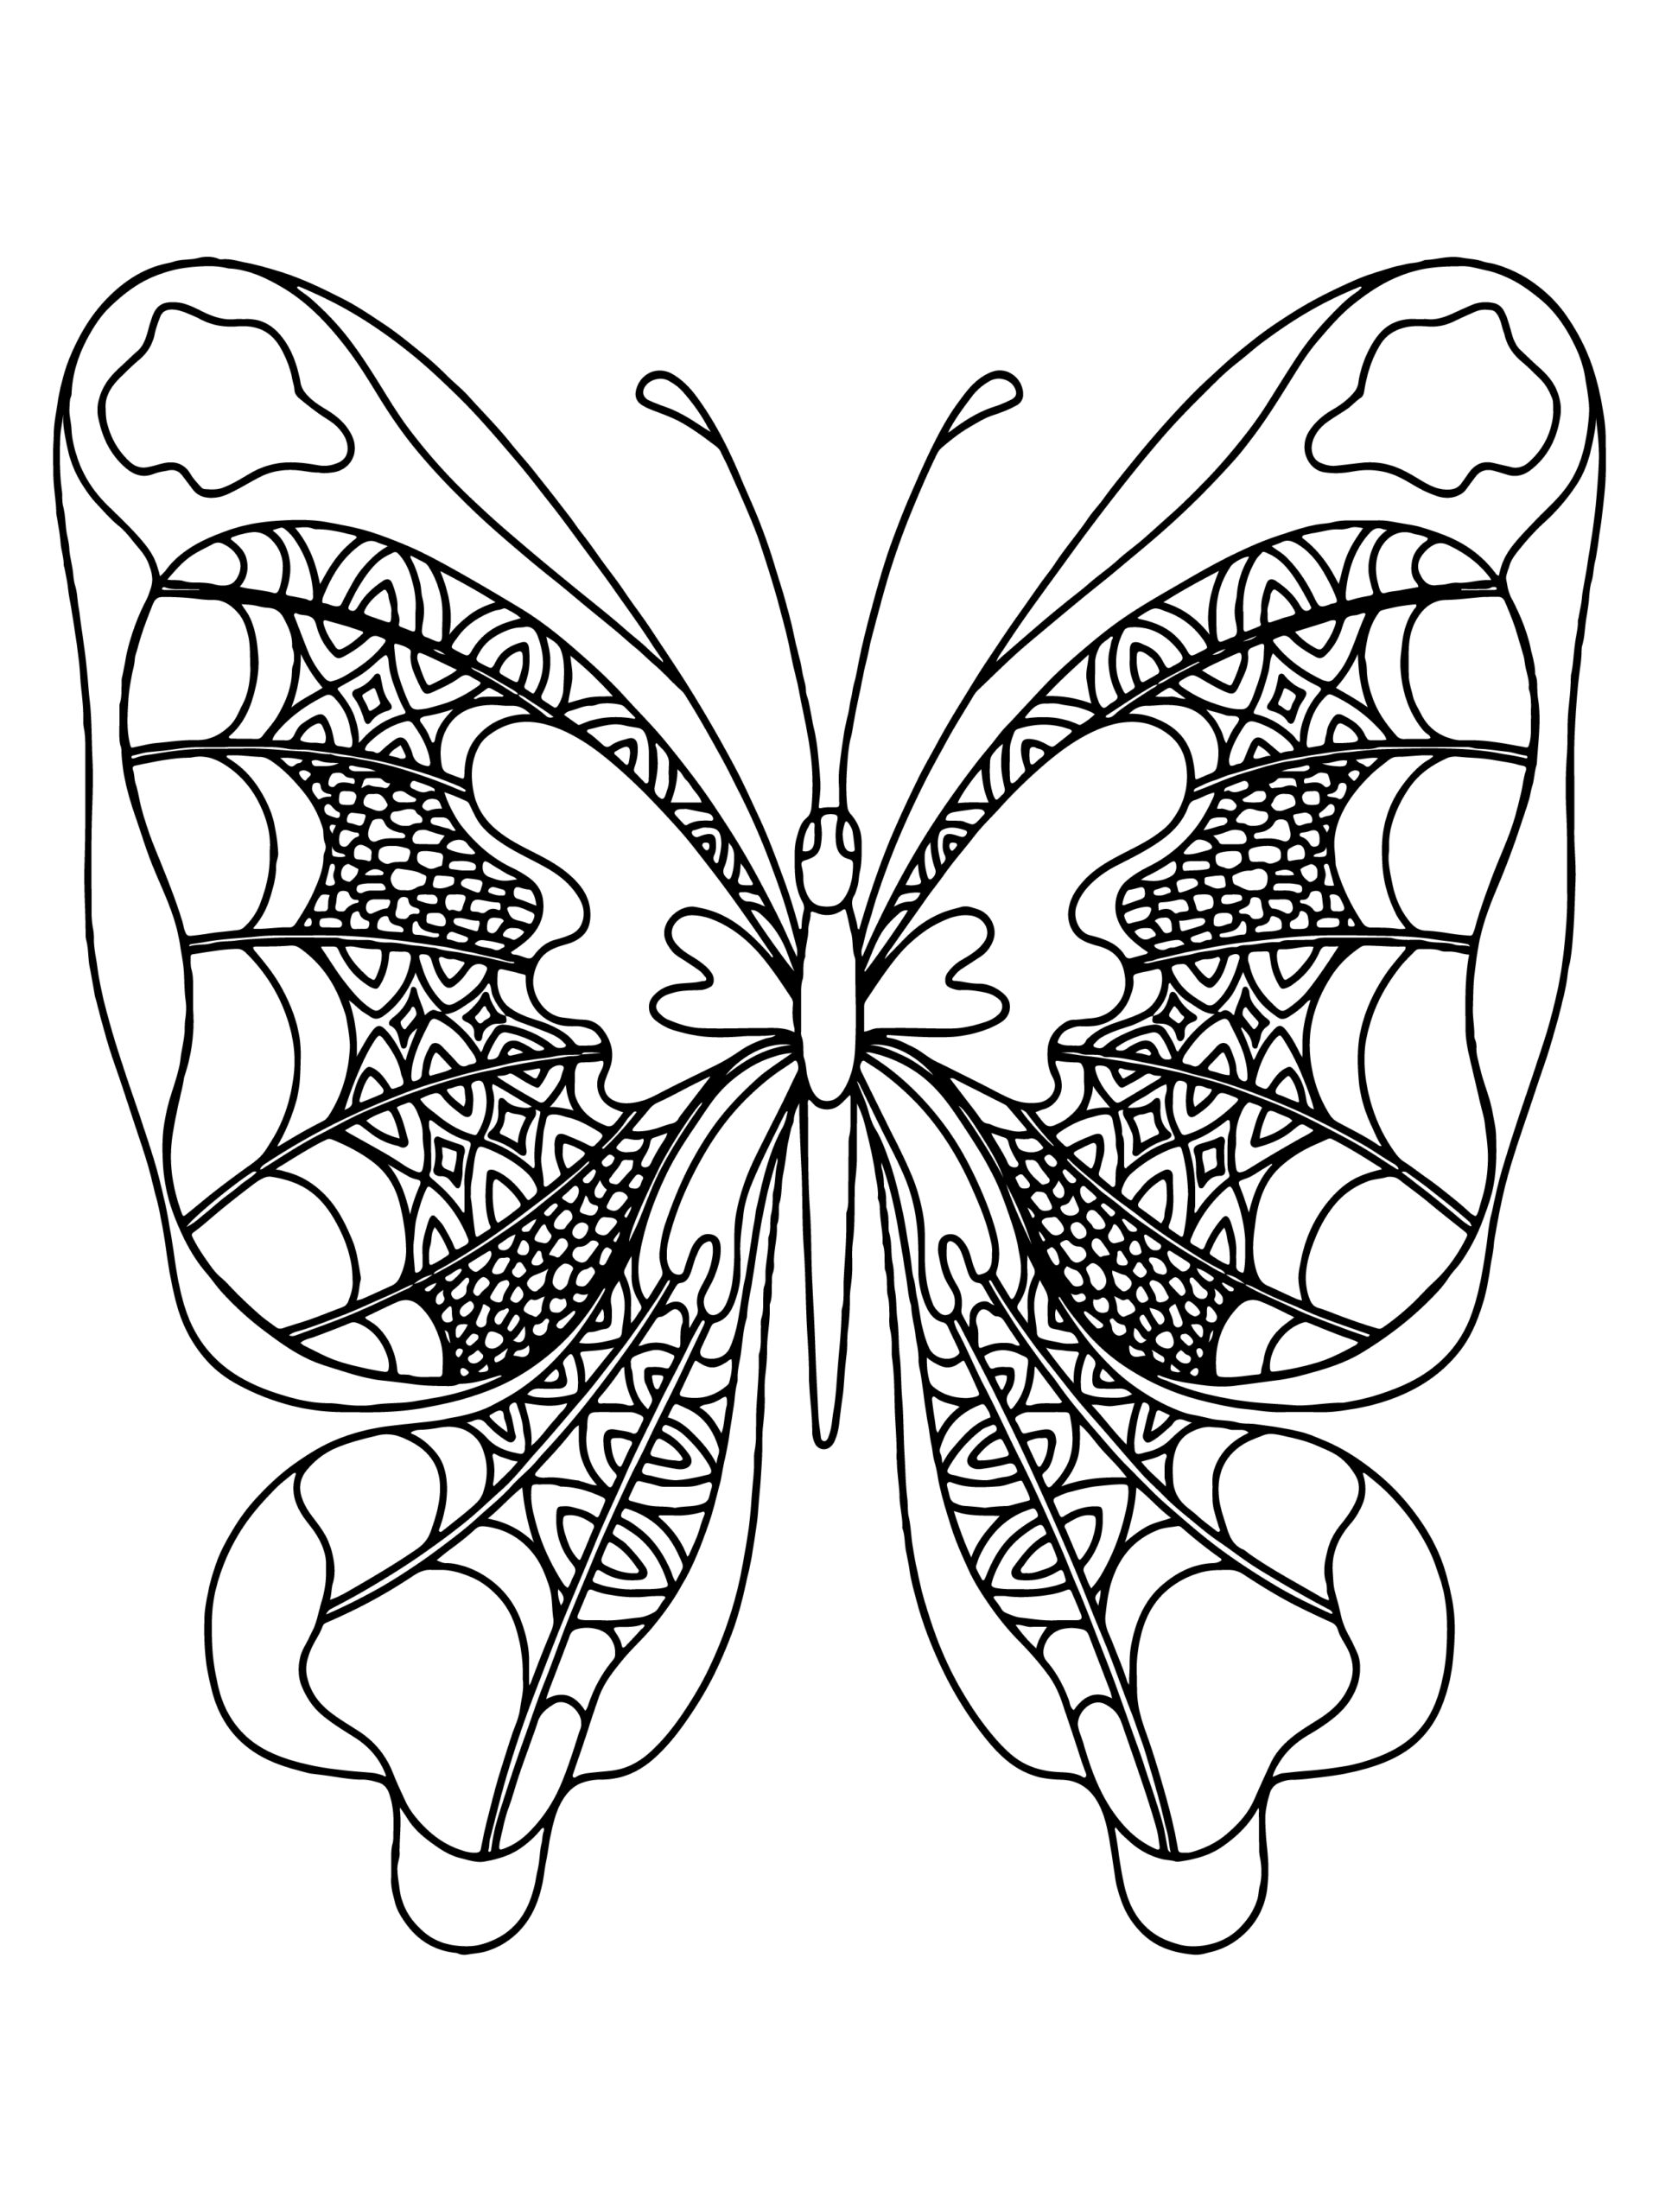 squeamish butterfly Coloring Page - Free Printable Coloring Pages for Kids